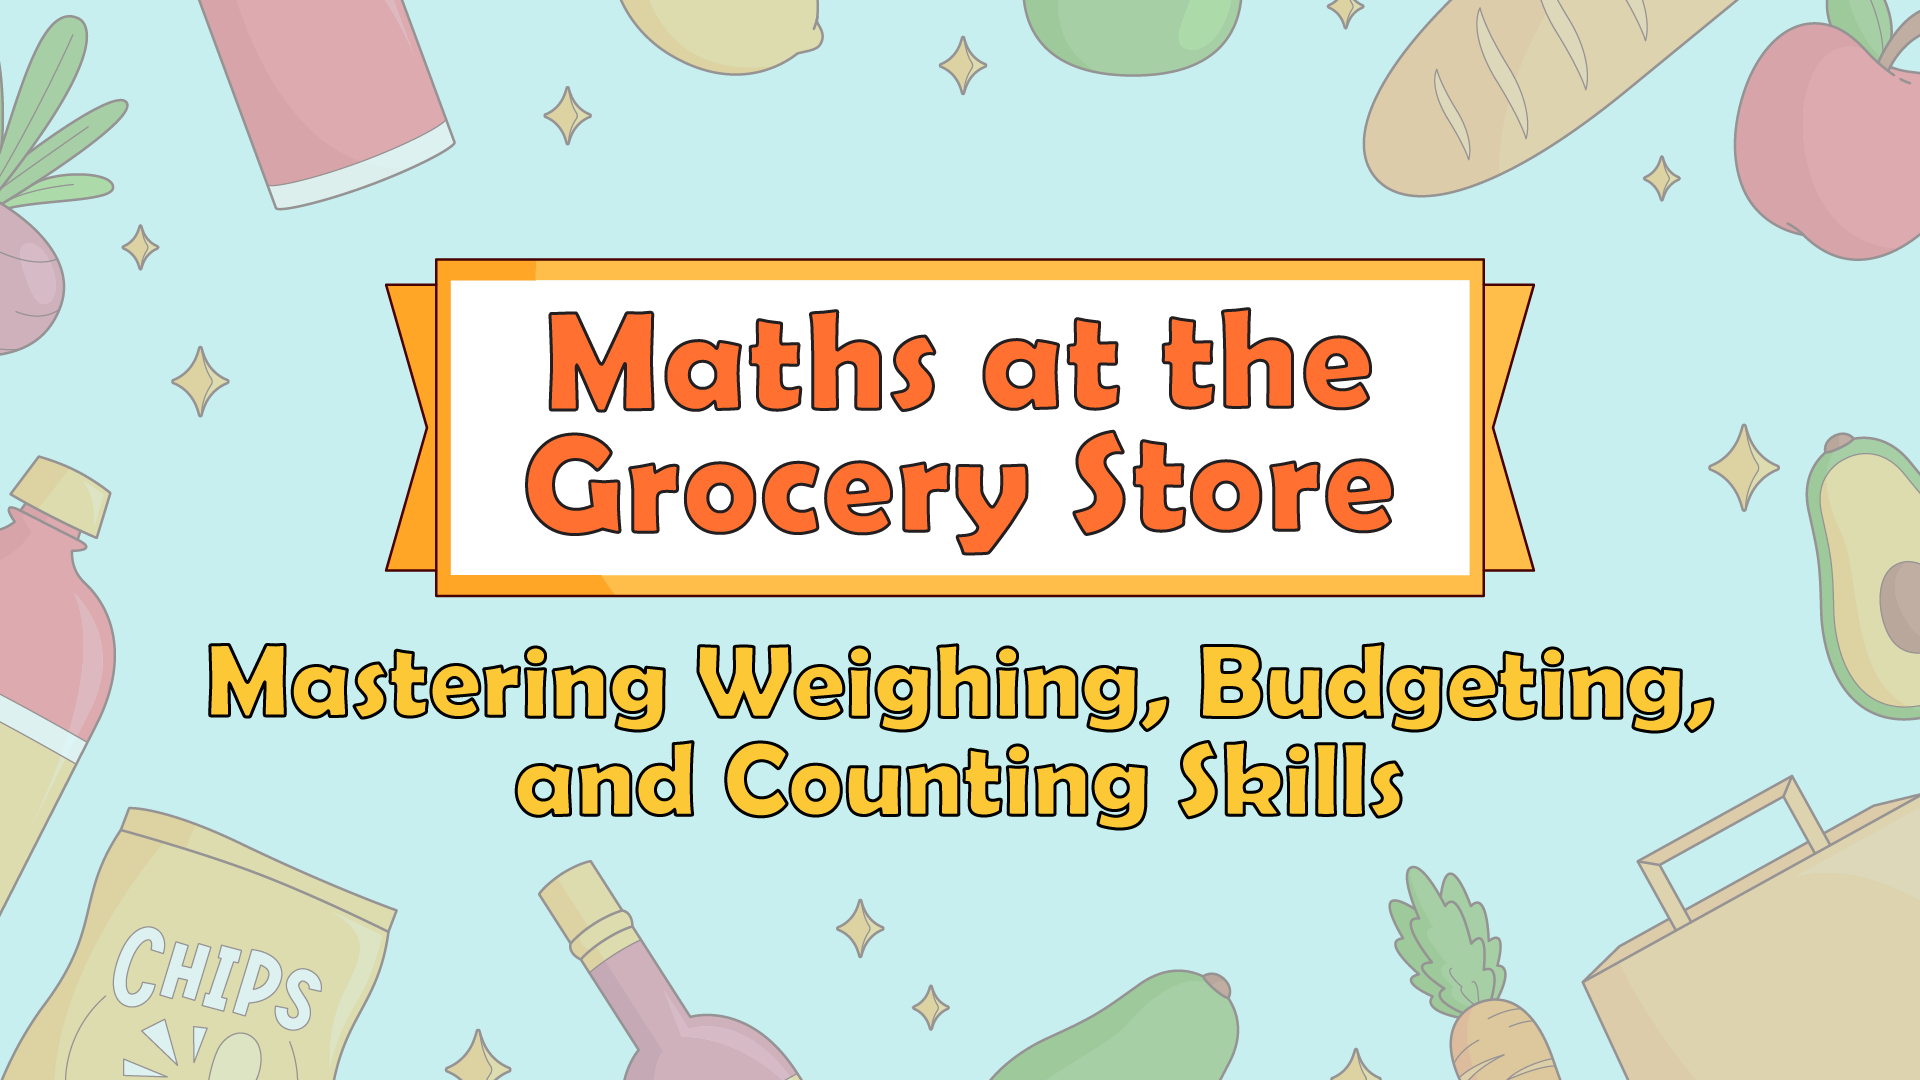 Maths at the Grocery Store: Mastering Weighing, Budgeting, and Counting Skills